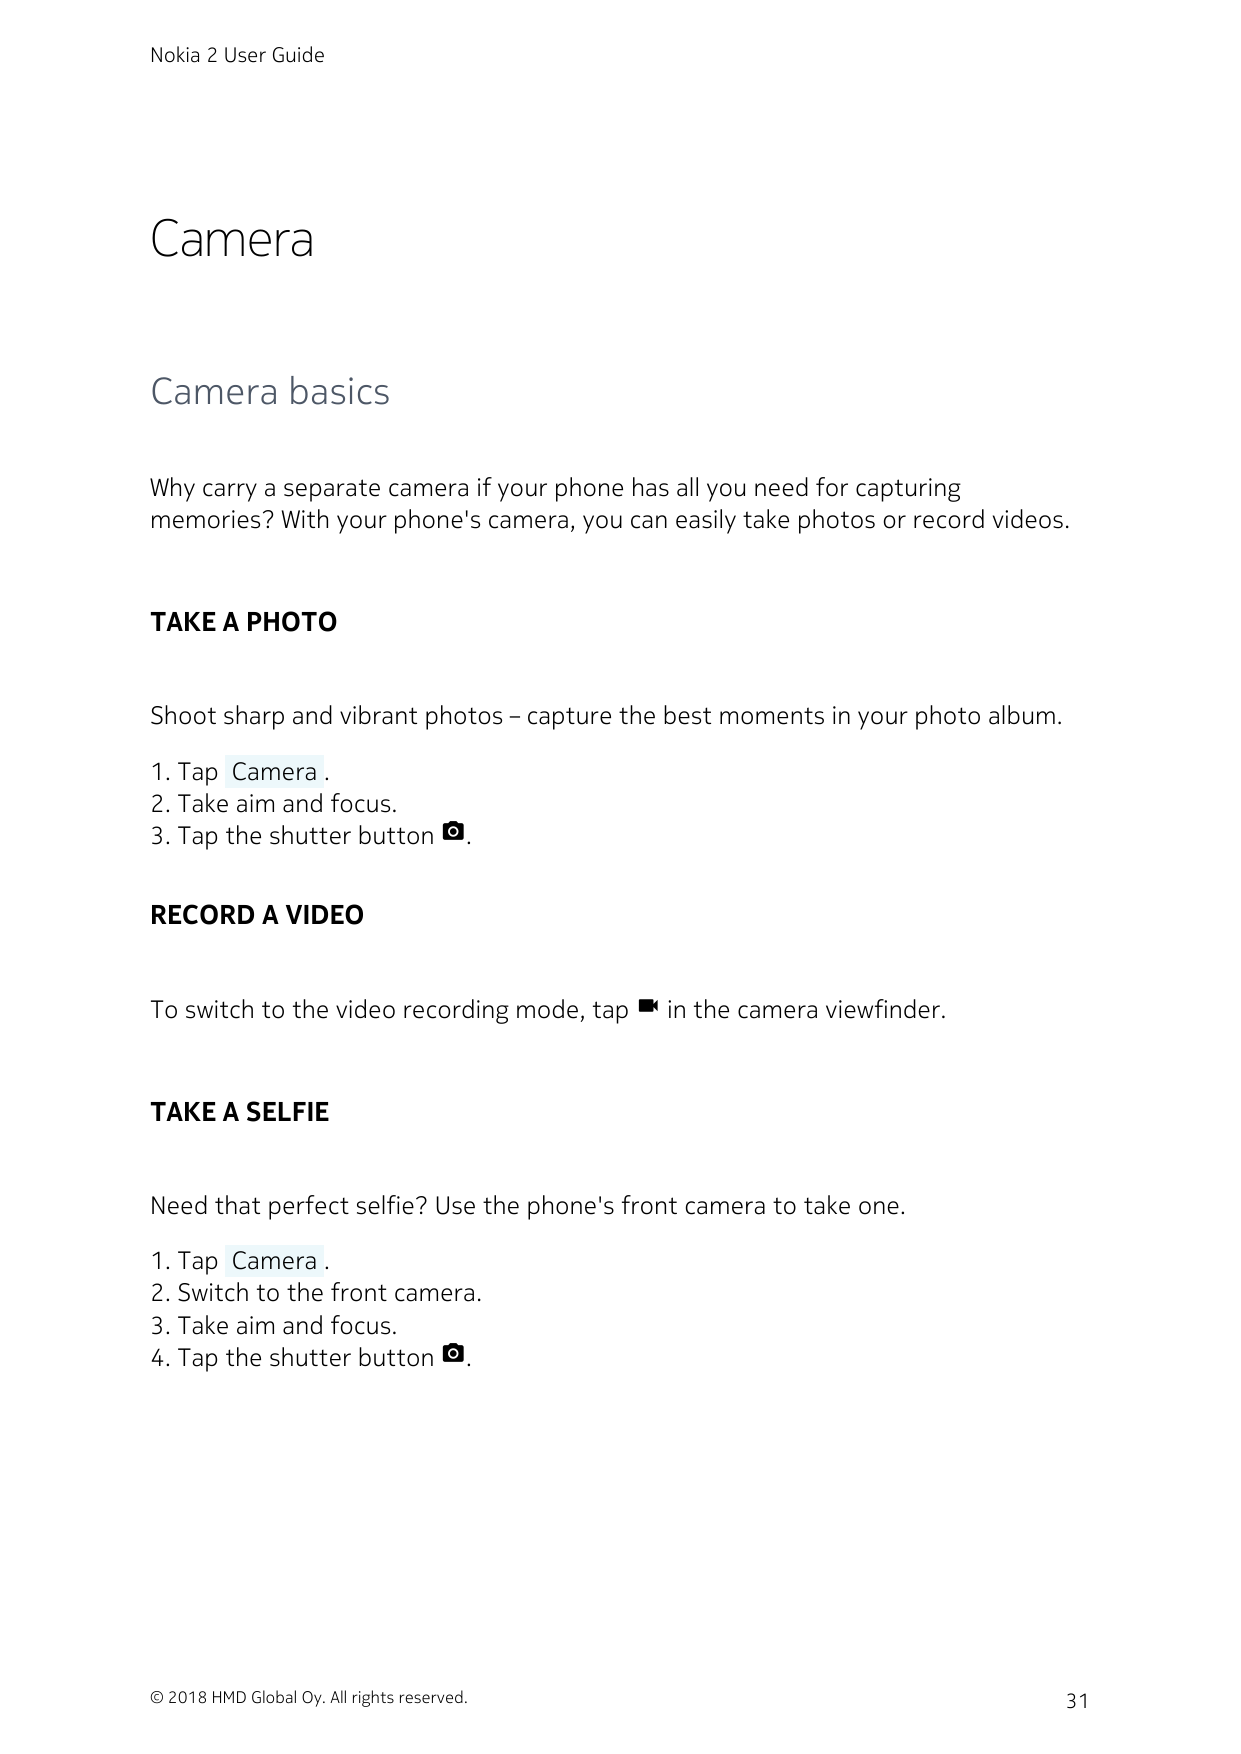 Nokia 2 User GuideCameraCamera basicsWhy carry a separate camera if your phone has all you need for capturingmemories? With your